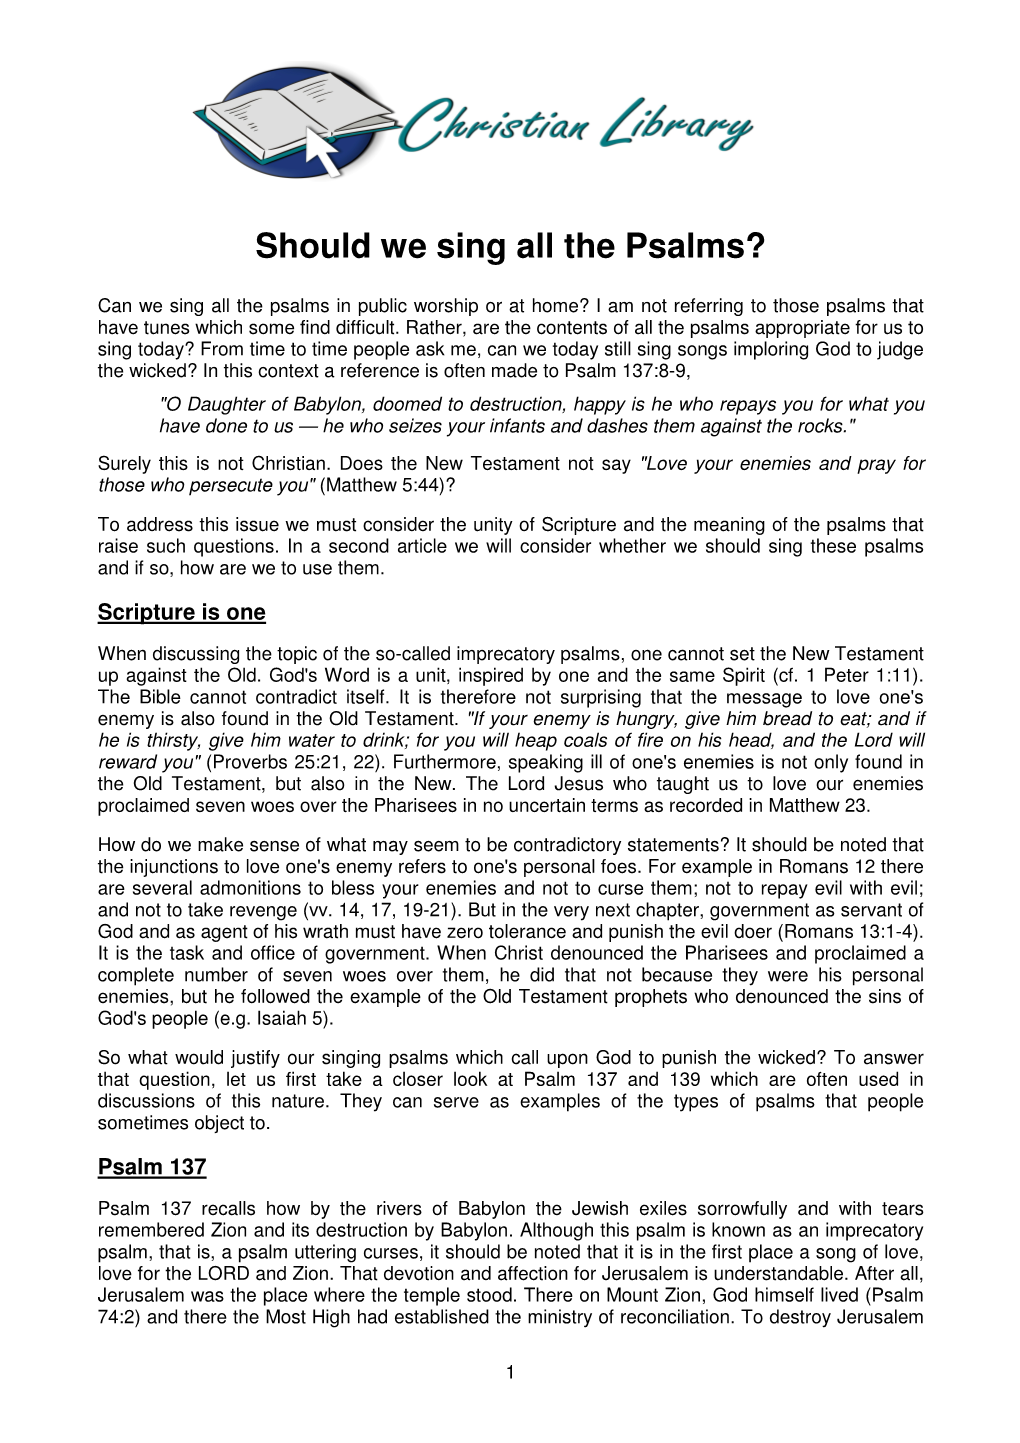 Should We Sing All the Psalms?